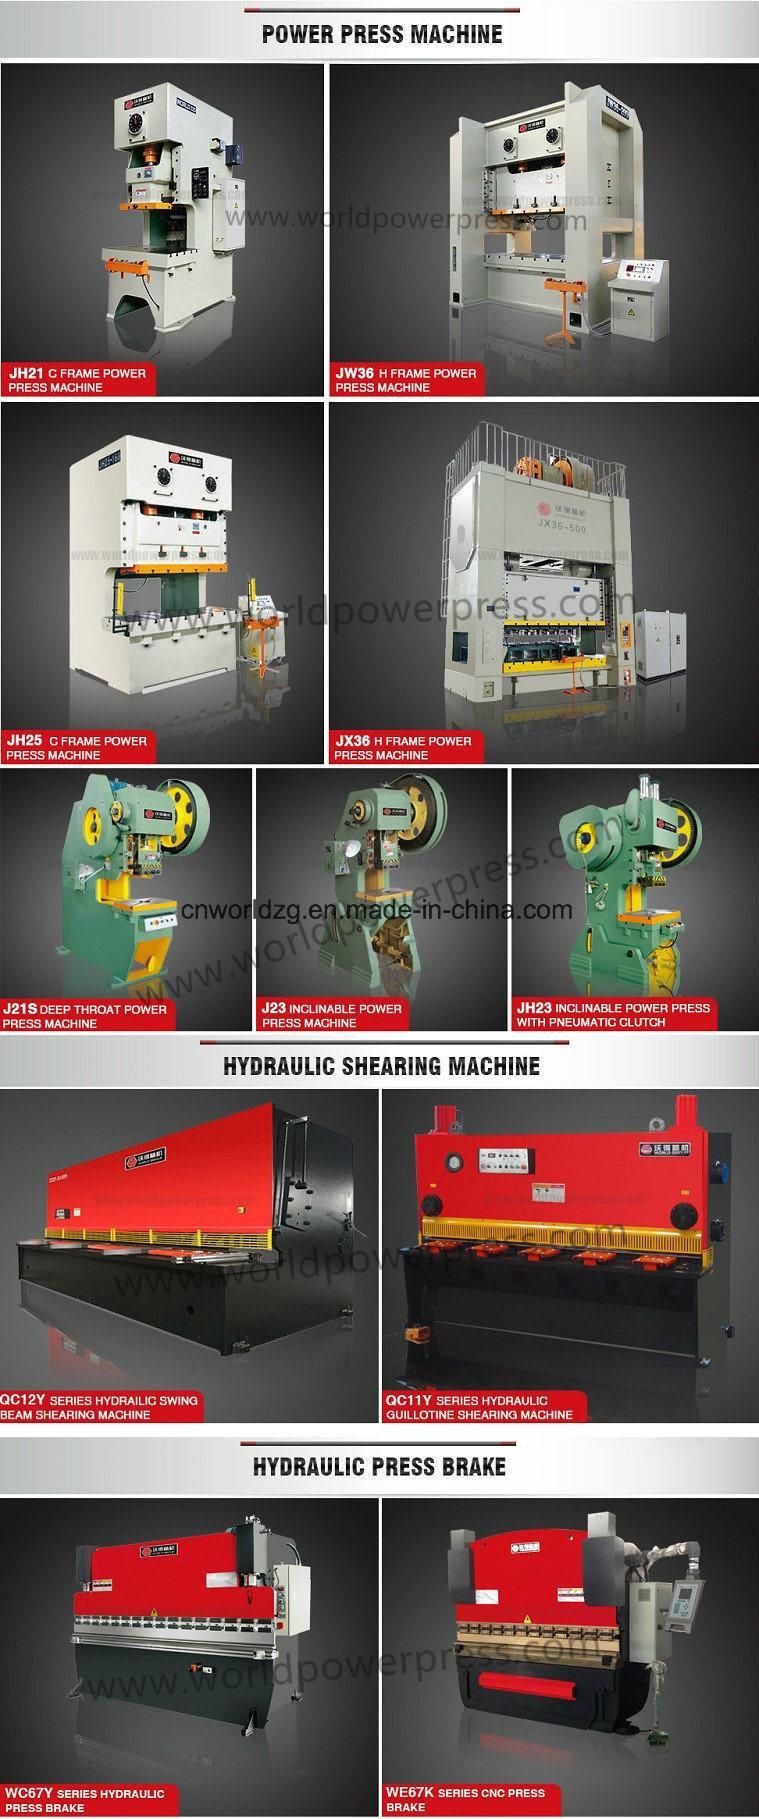 4mm Thickness Steel Plate Shearing Machine with E21 Nc System